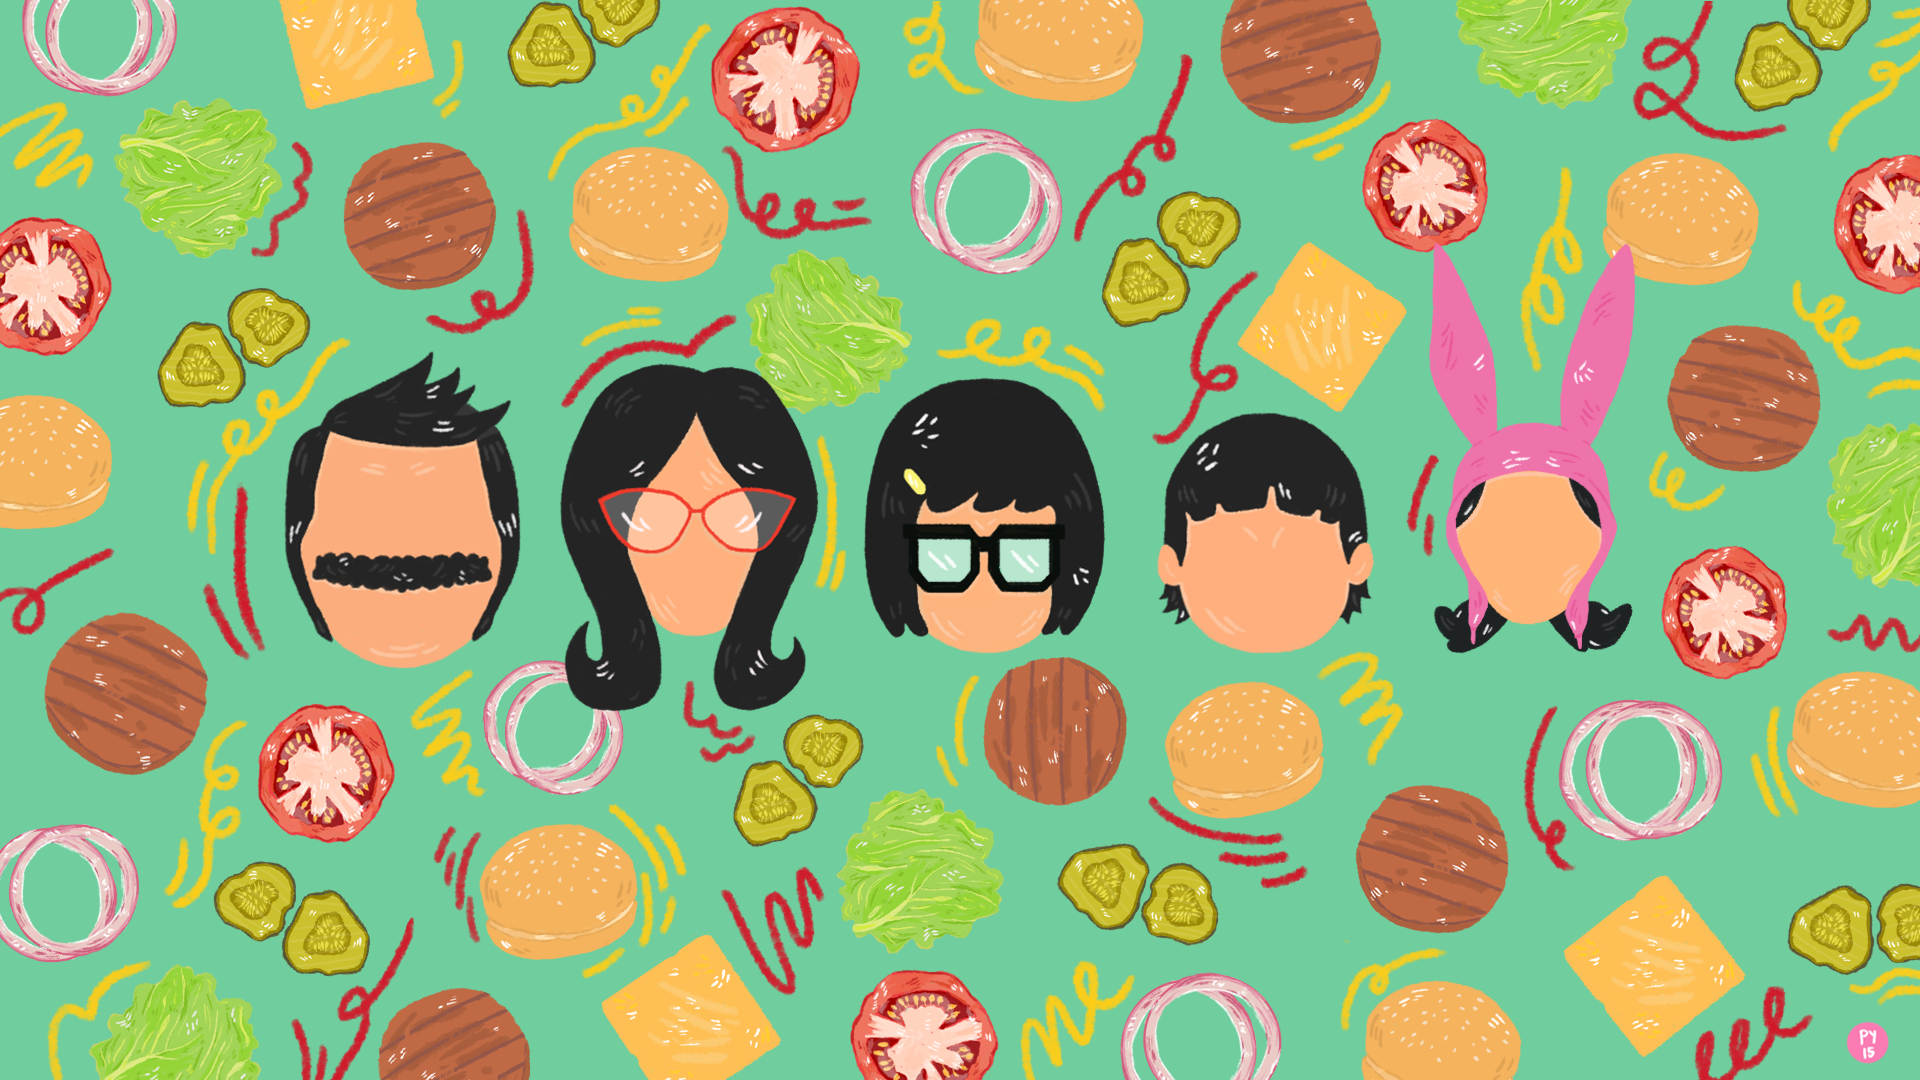 Download Bobs Burgers 2020 Wallpapers for Mobile iPhone Mac Wallpaper   GetWallsio